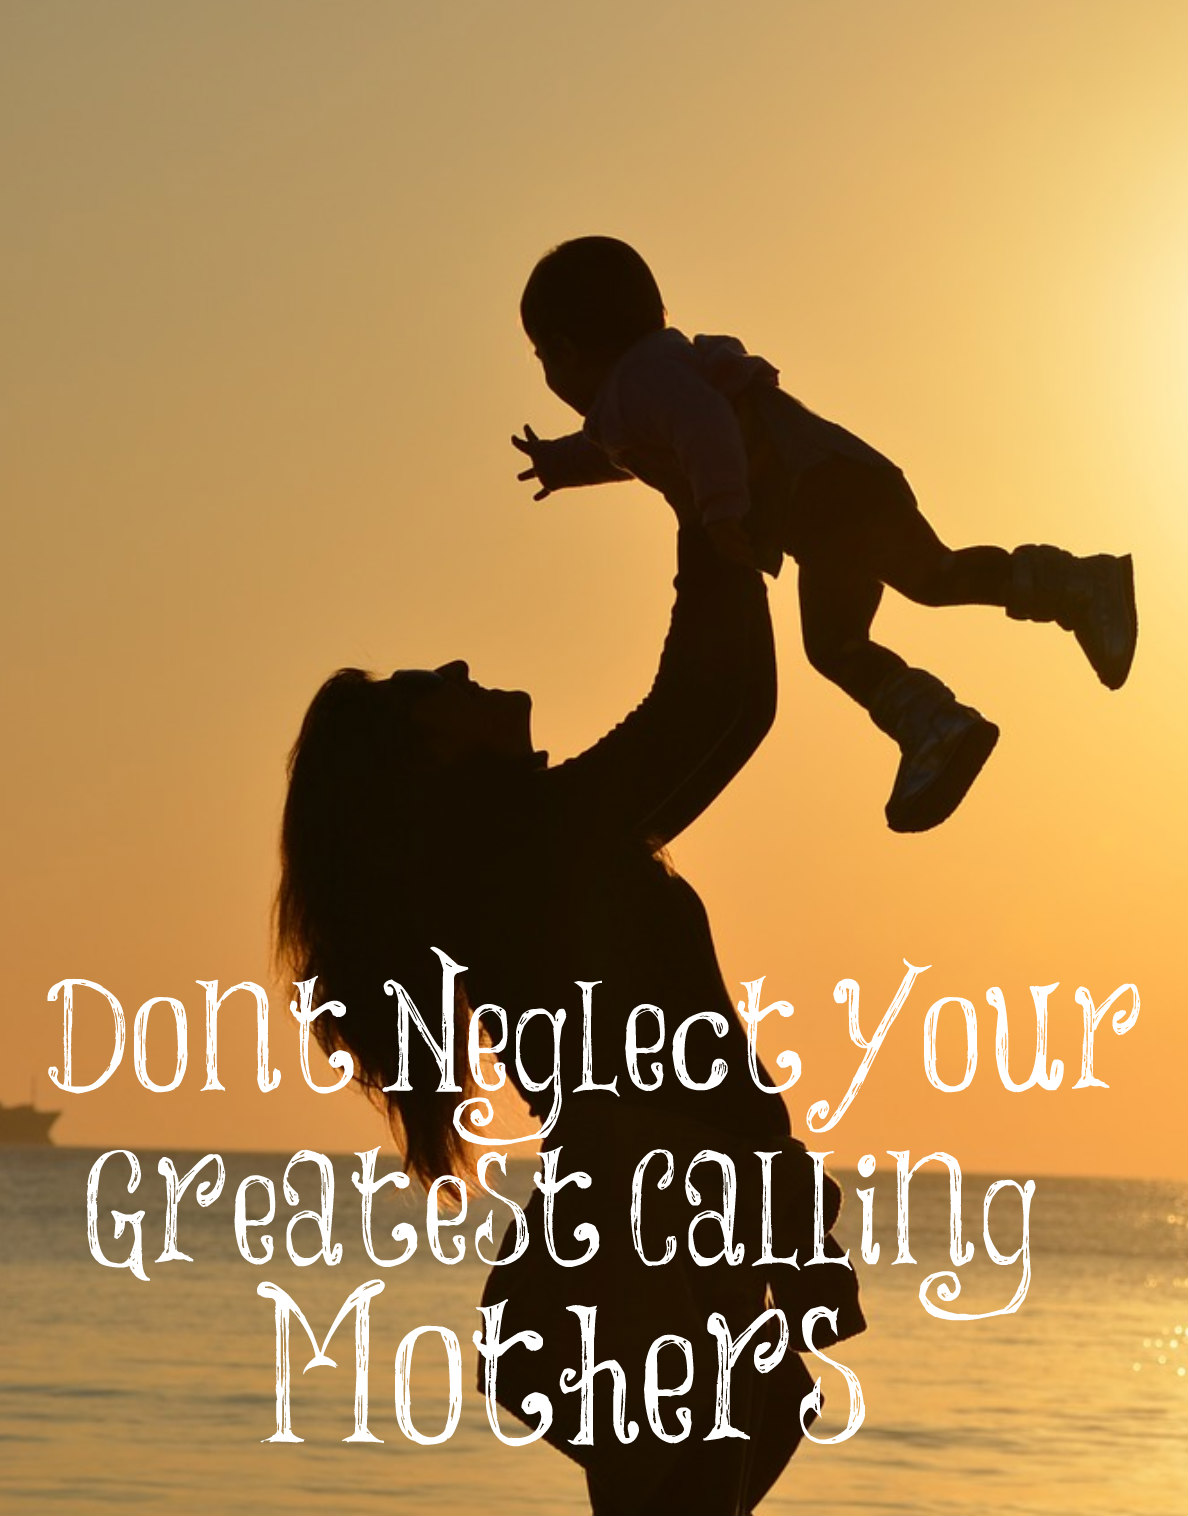 Don’t Neglect Your Greatest Calling, Mothers!